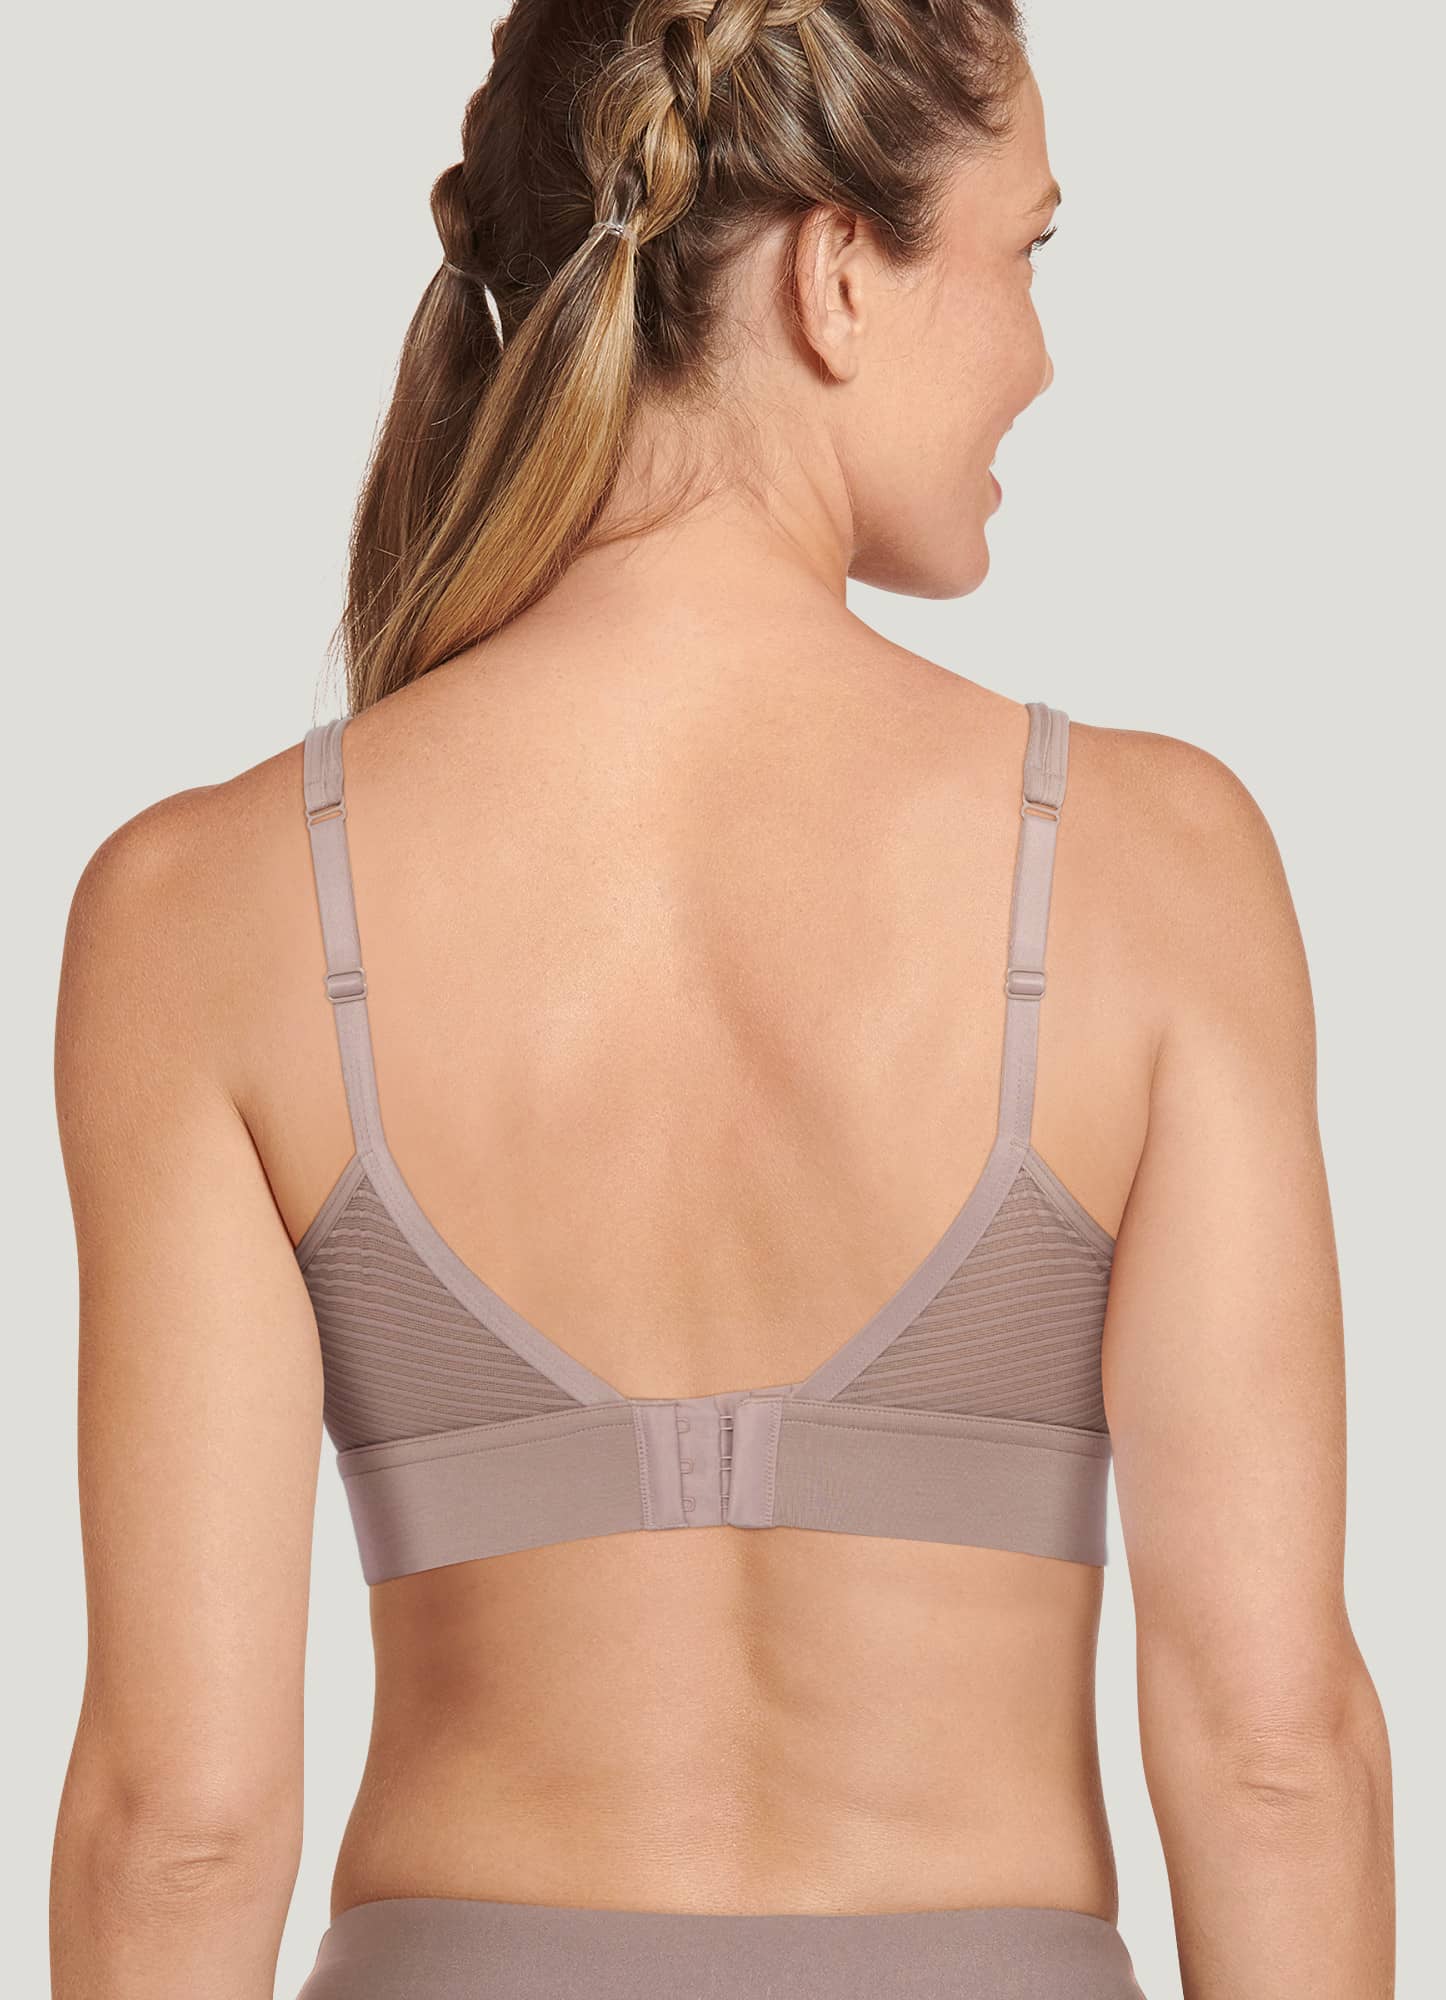 Supersoft Modal V-Neck Molded Cup Bra Warm Shell Grey